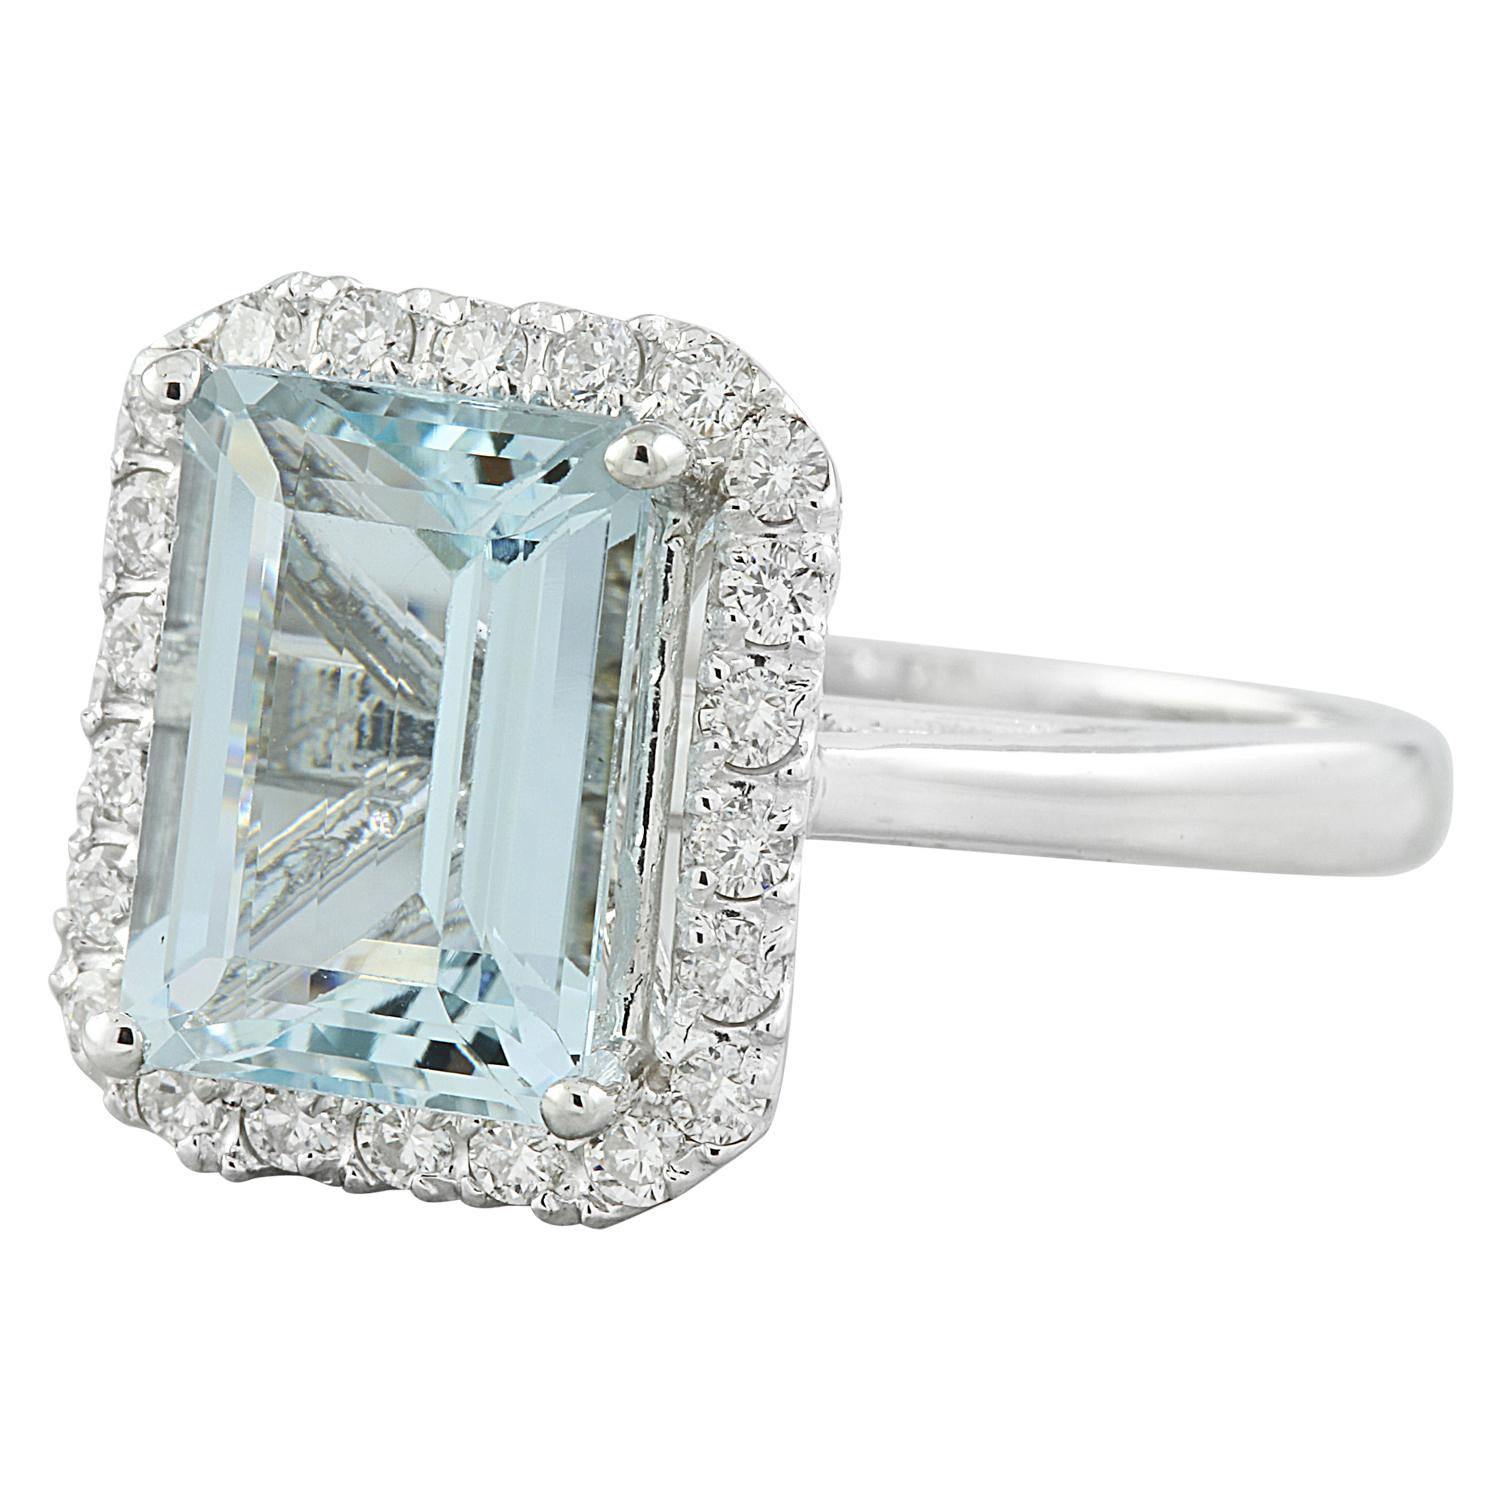 Introducing our exquisite 3.30 Carat Natural Aquamarine Ring, meticulously crafted in elegant 14K Solid White Gold. Authenticated with a stamped mark of 14K, this stunning ring weighs a total of 3.2 grams, ensuring both grace and durability. At its